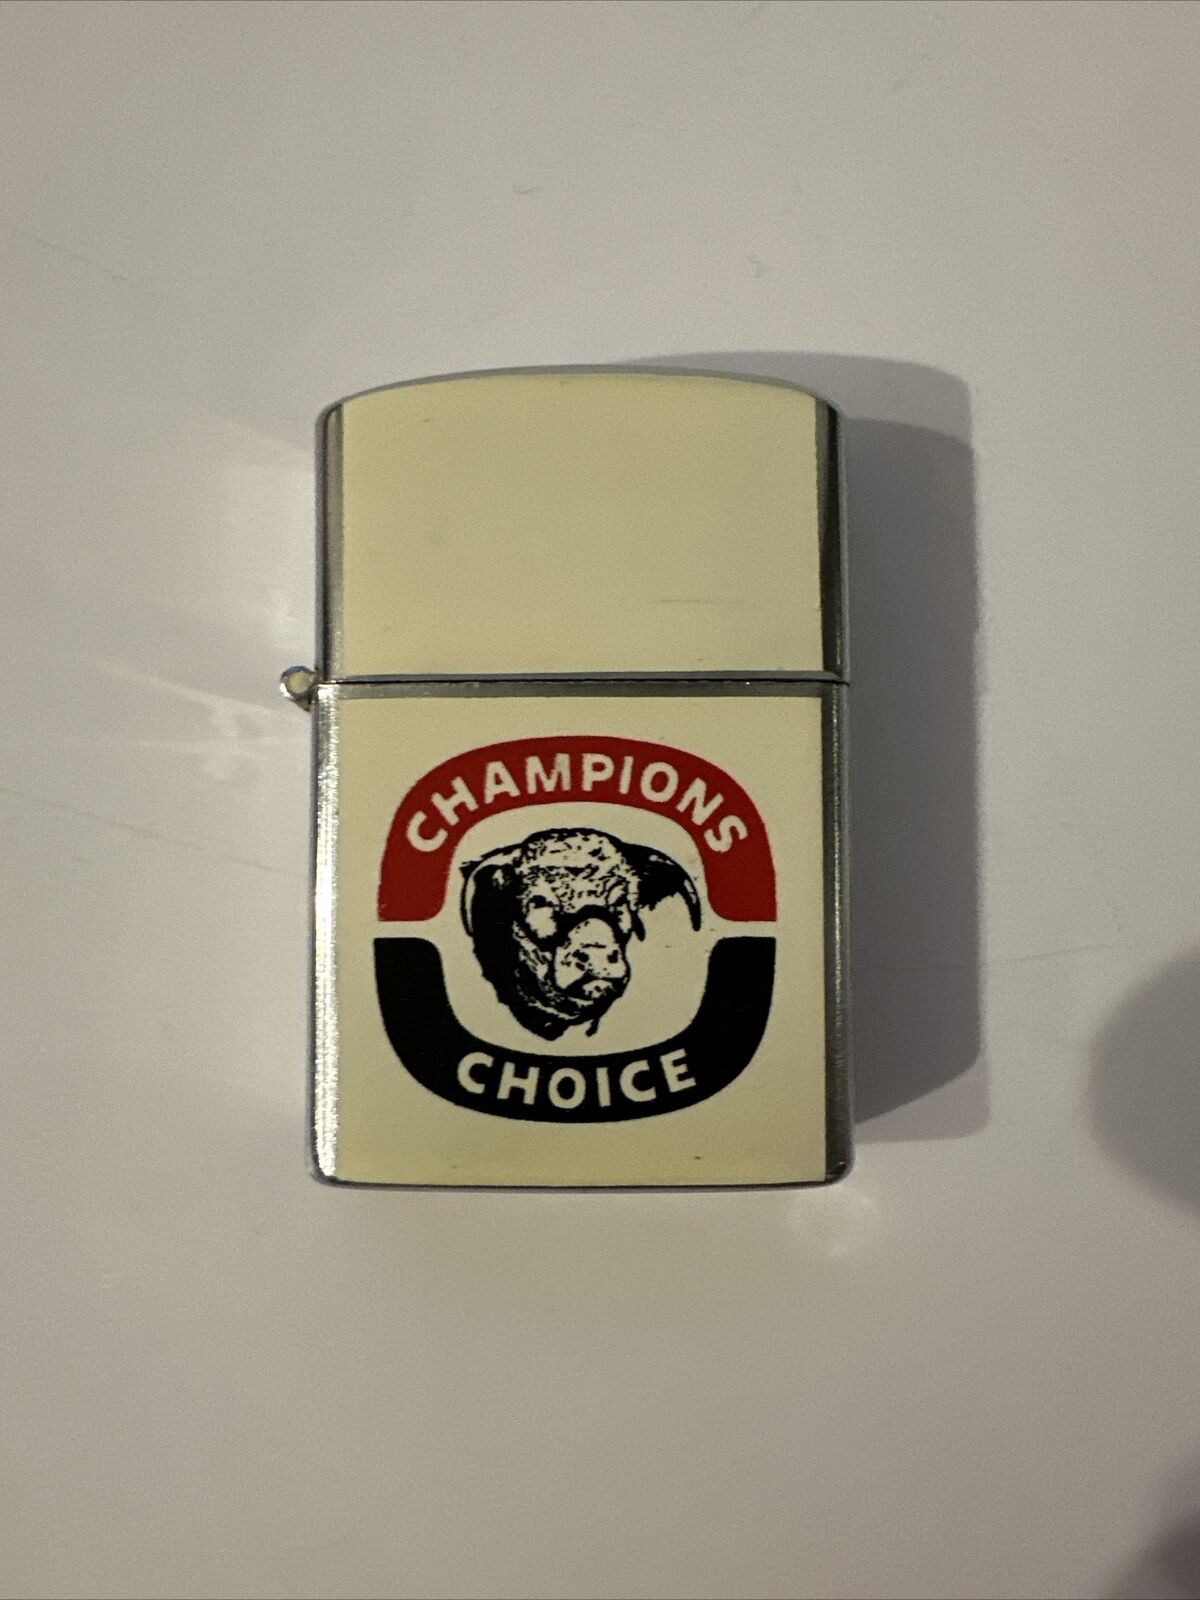 Vintage Champions Choice Beef Cow Advertising Lighter Windproof Flip Style